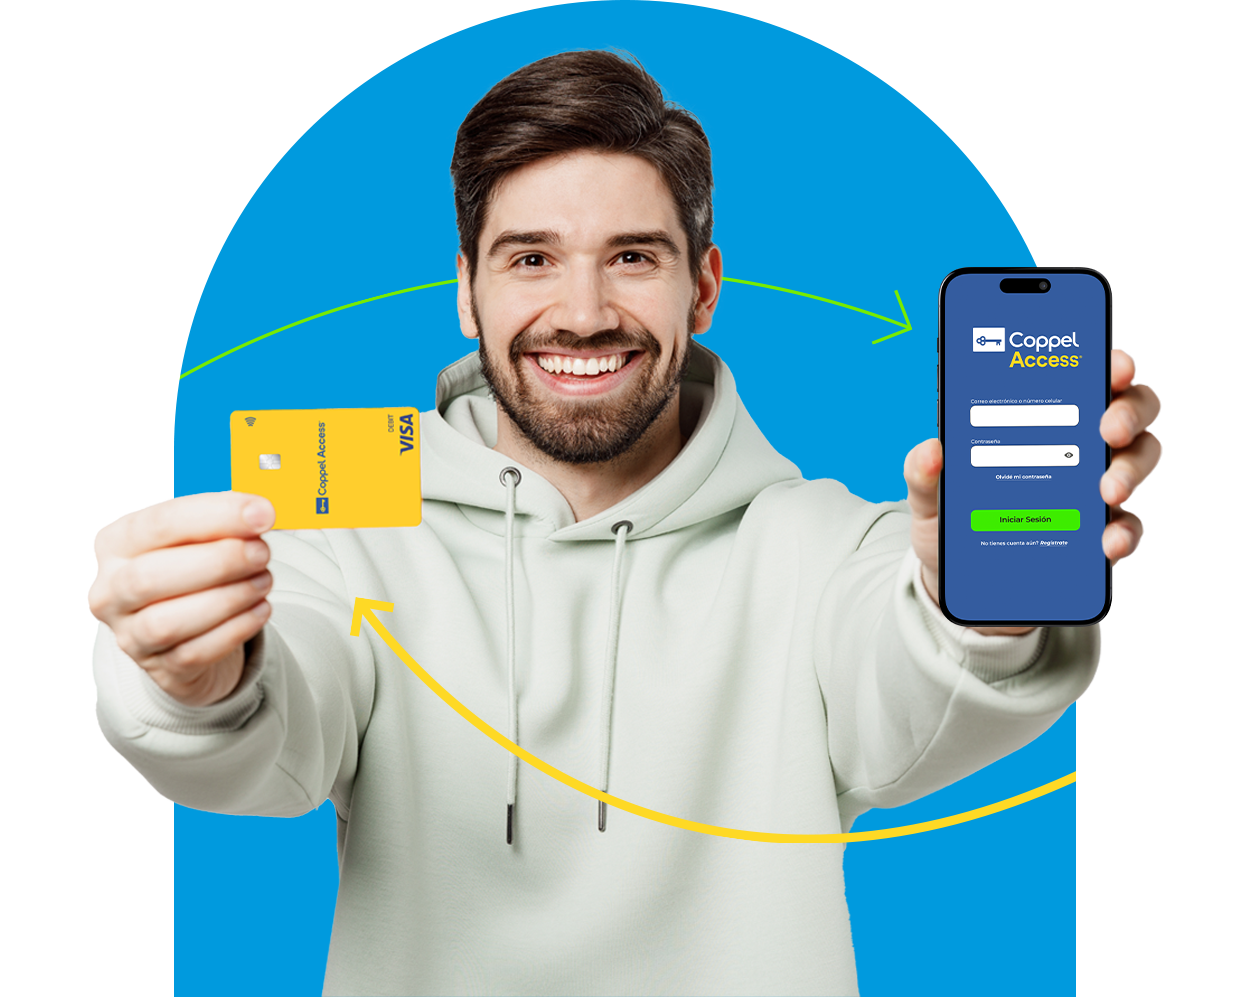 Man_with-card-and-app-2